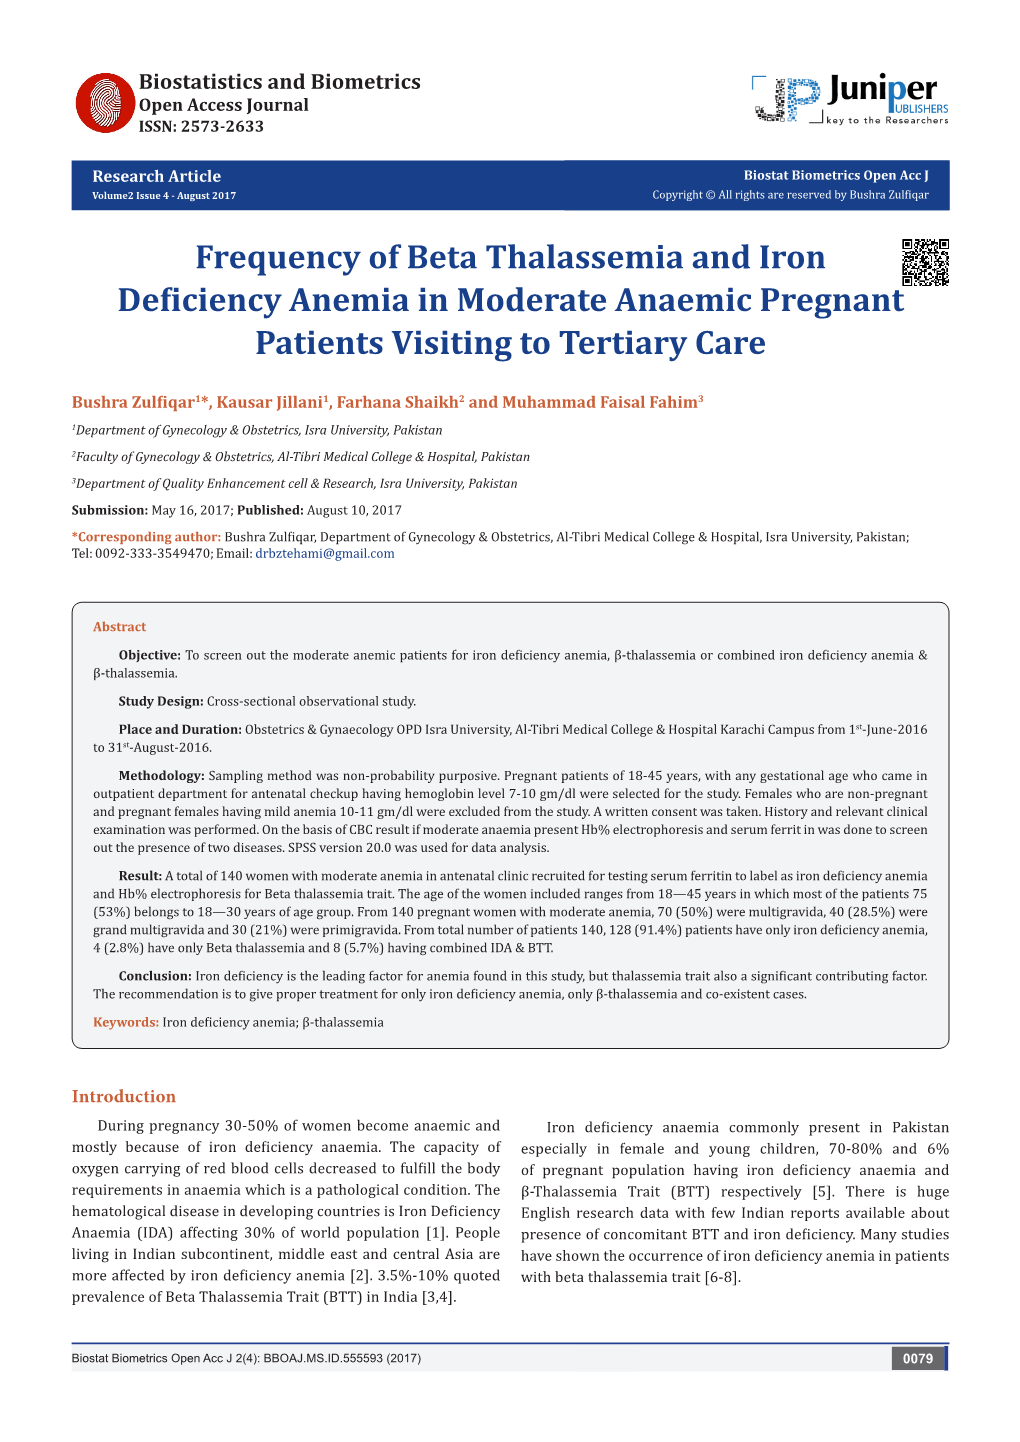 Frequency of Beta Thalassemia and Iron Deficiency Anemia in Moderate Anaemic Pregnant Patients Visiting to Tertiary Care